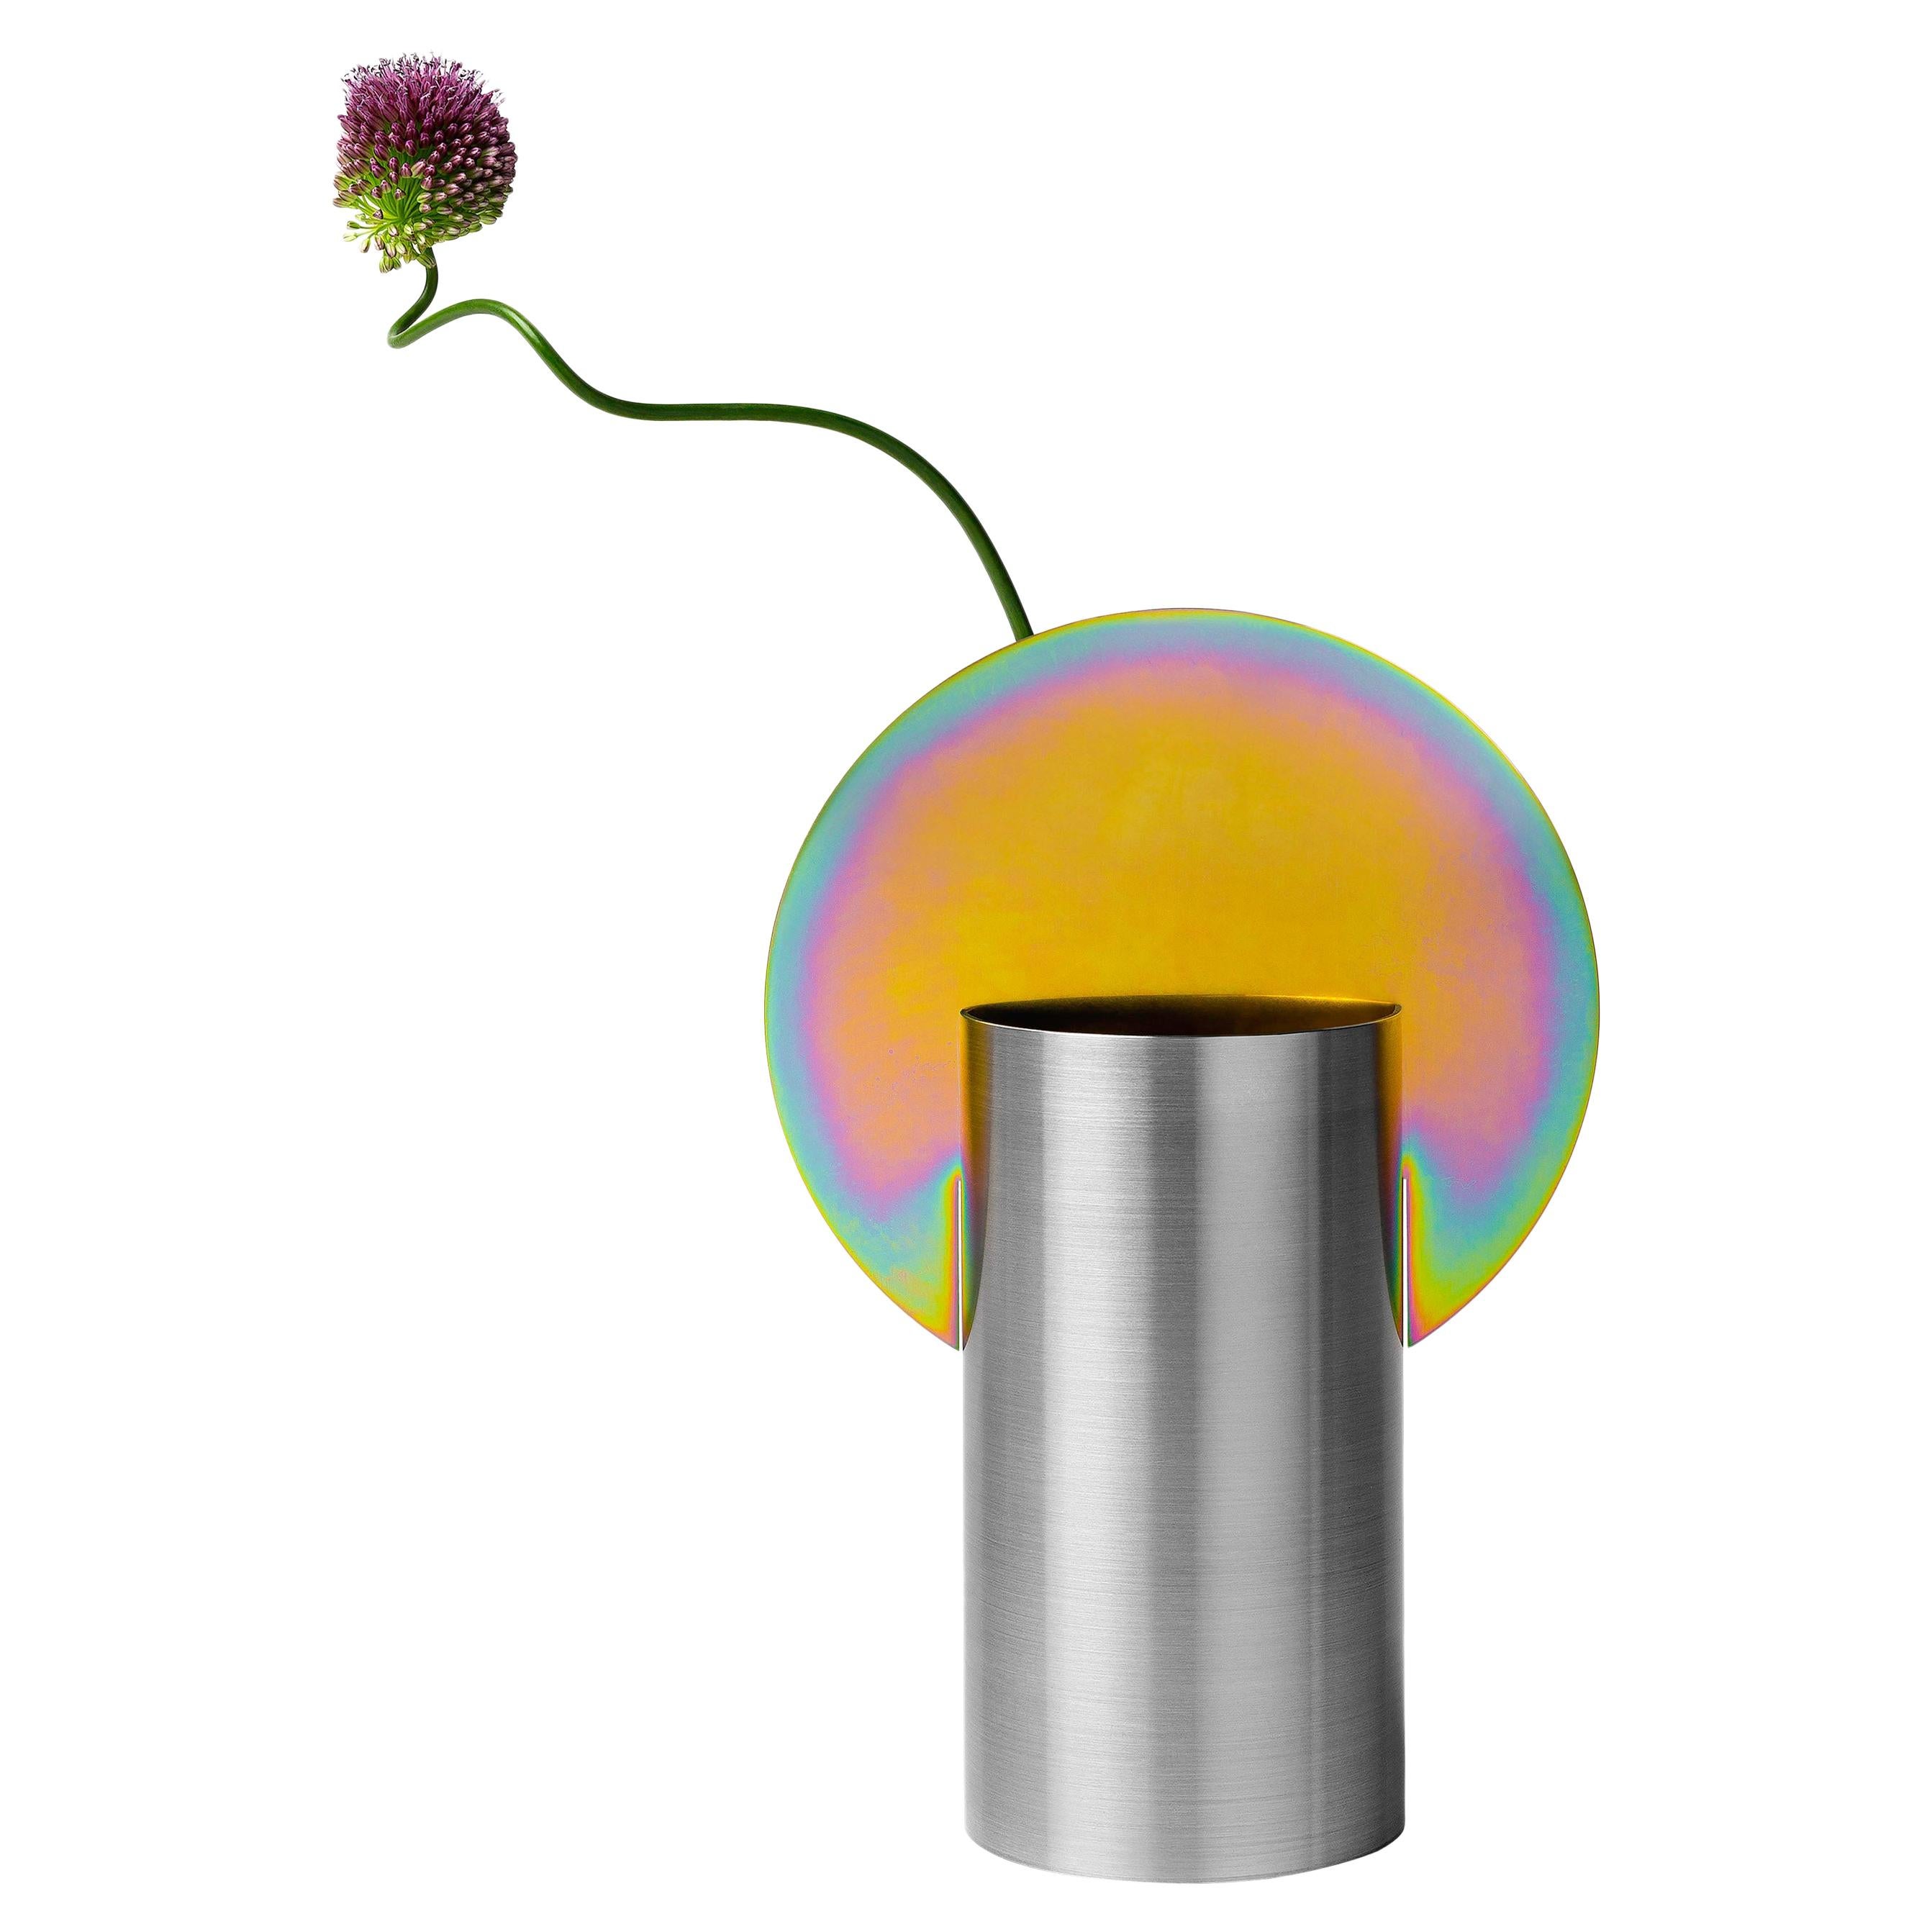 Limited Edition Modern Malevich Vase CSL7 by NOOM with Rainbow Zinc Plating Stee